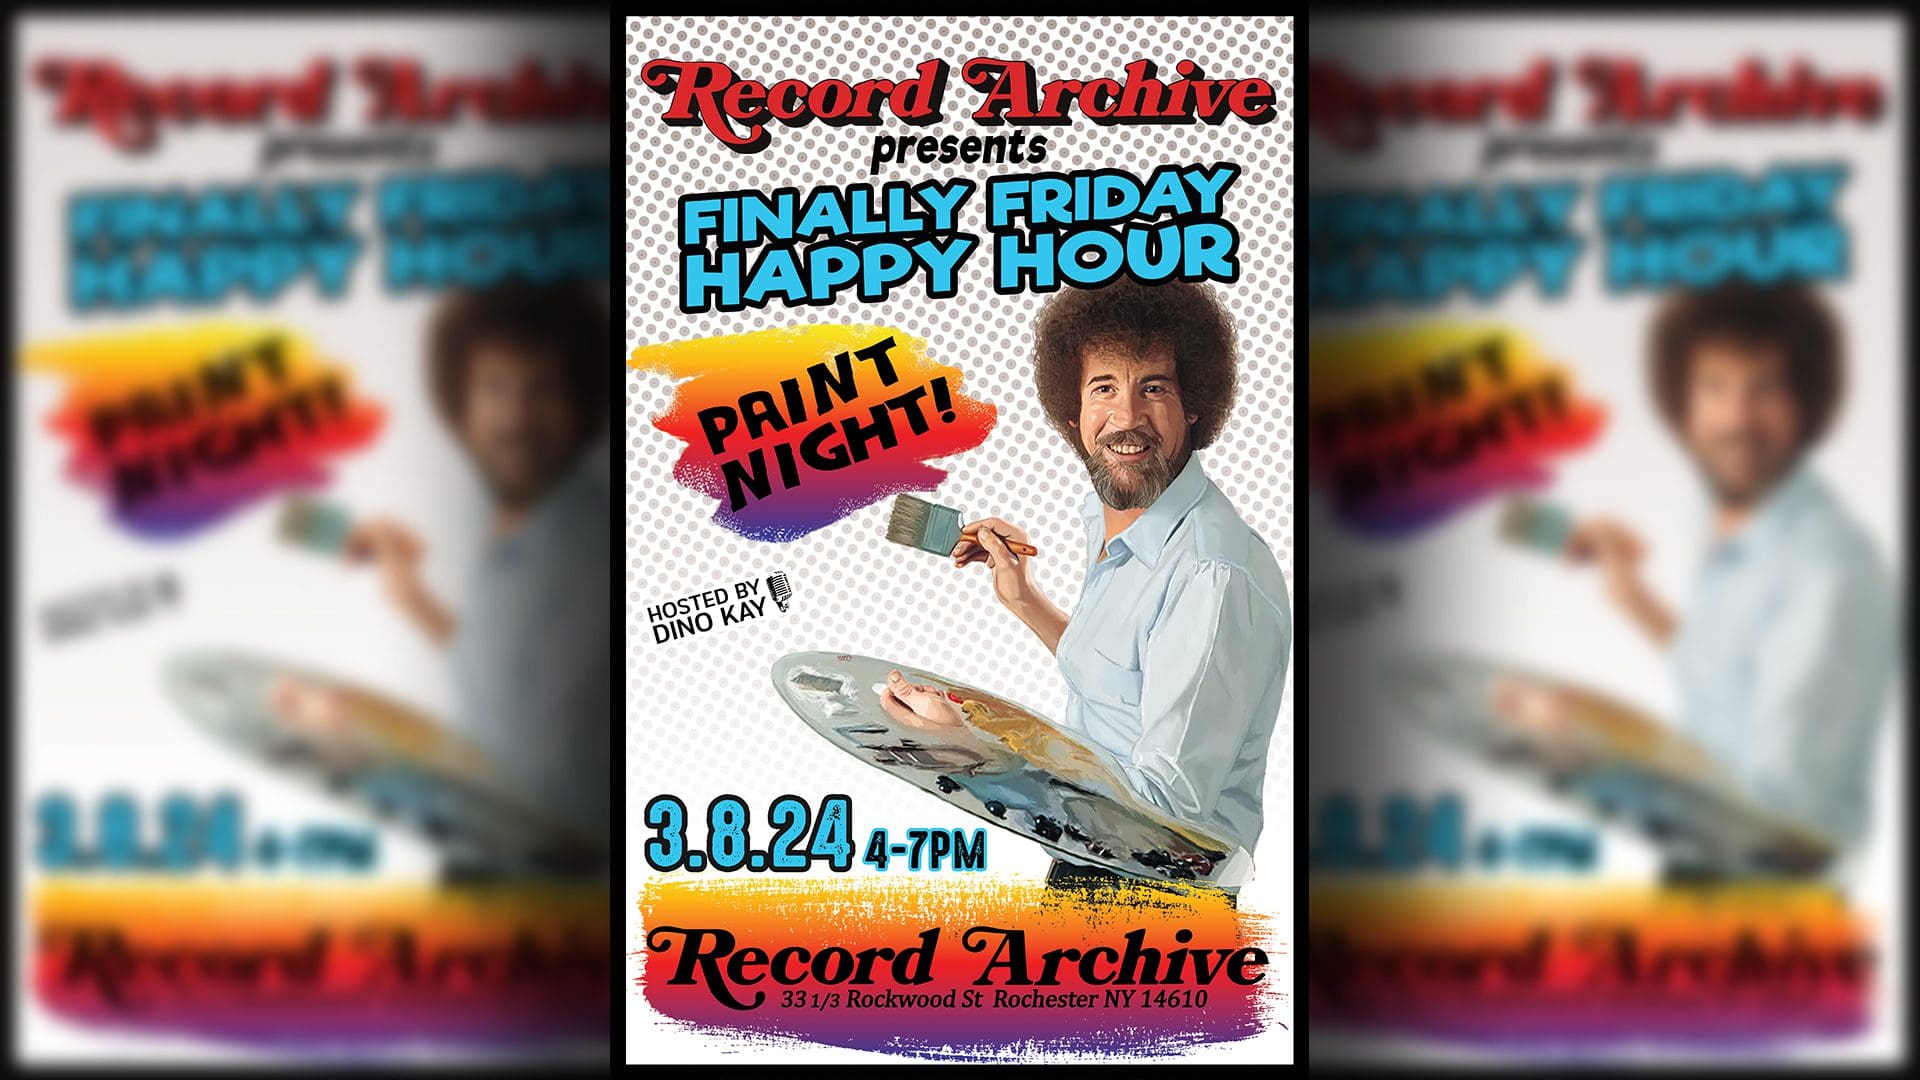 Record Archive presents Finally Friday Happy Hour Paint Night. Hosted by Dino Kay. 3.08.24. Record Archive 33 1/3 Rockwood Street Rochester NY 14610